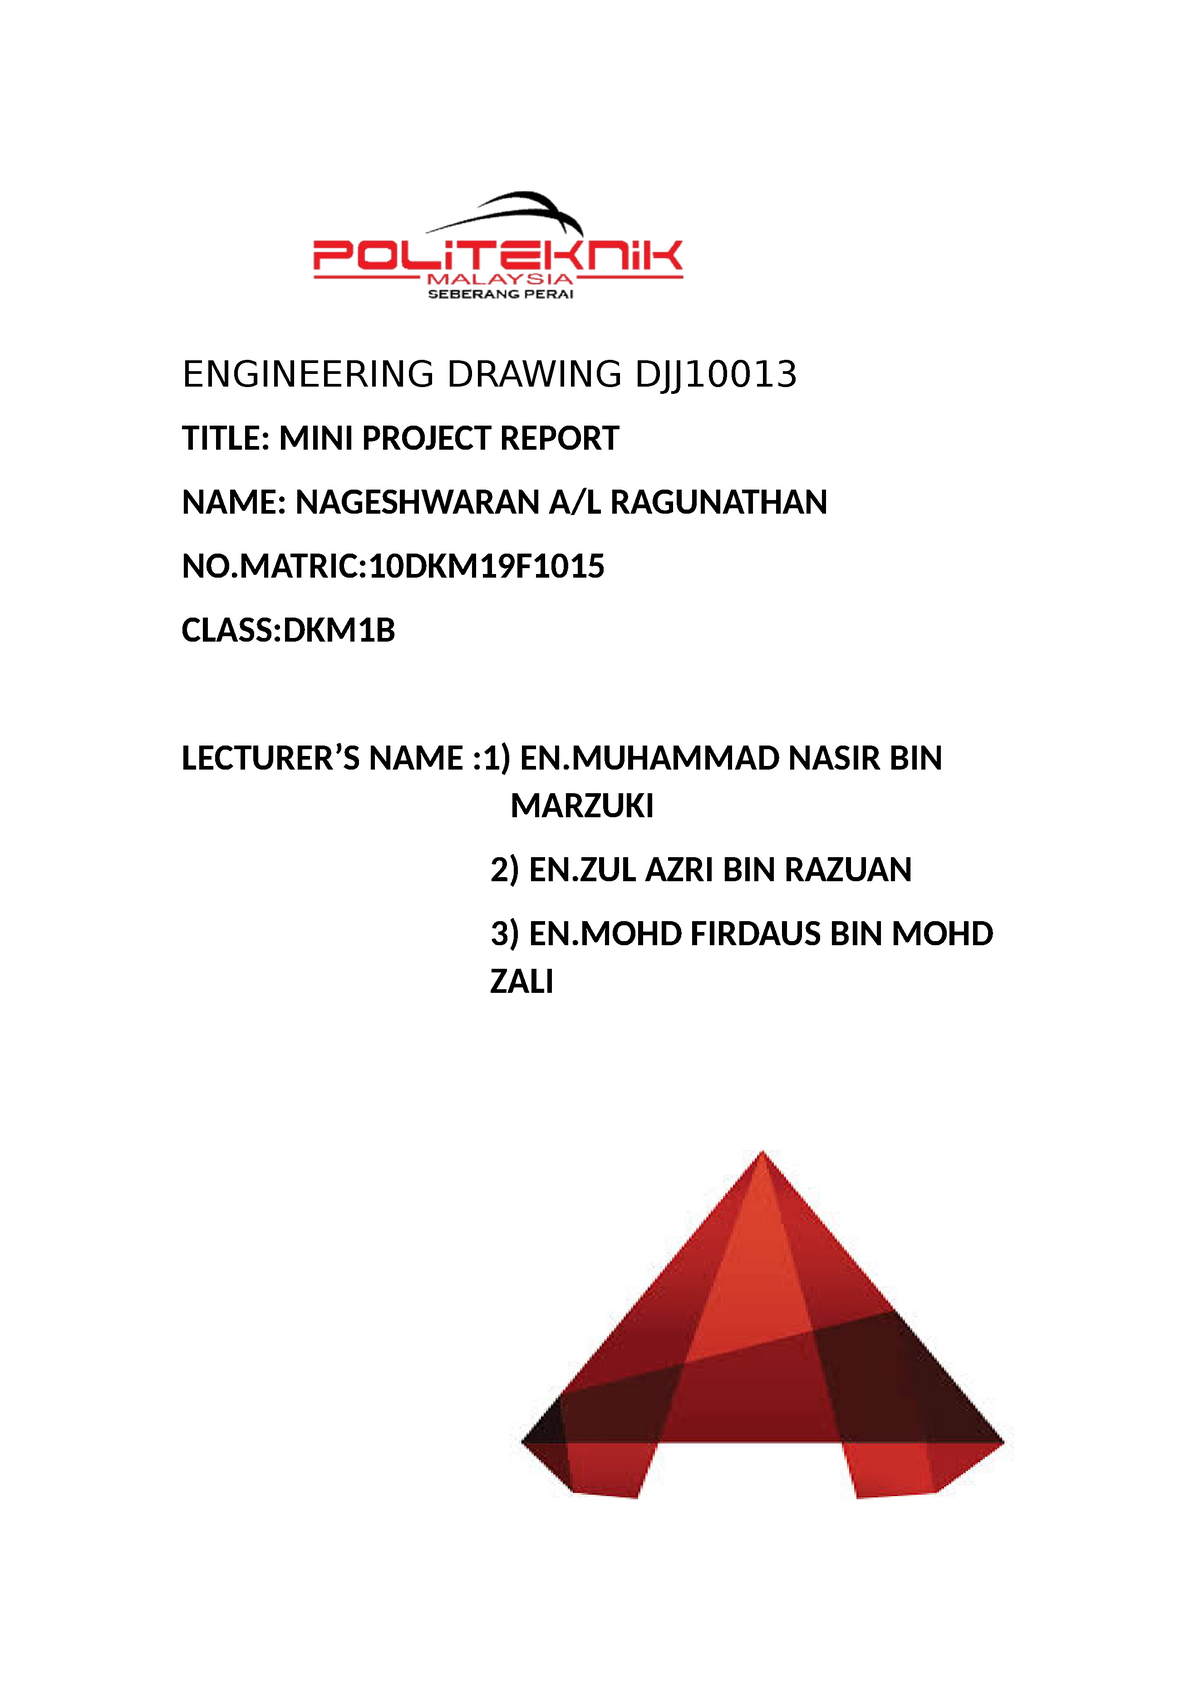 Engineering Project. Mini project drawing autocad   ENGINEERING ...